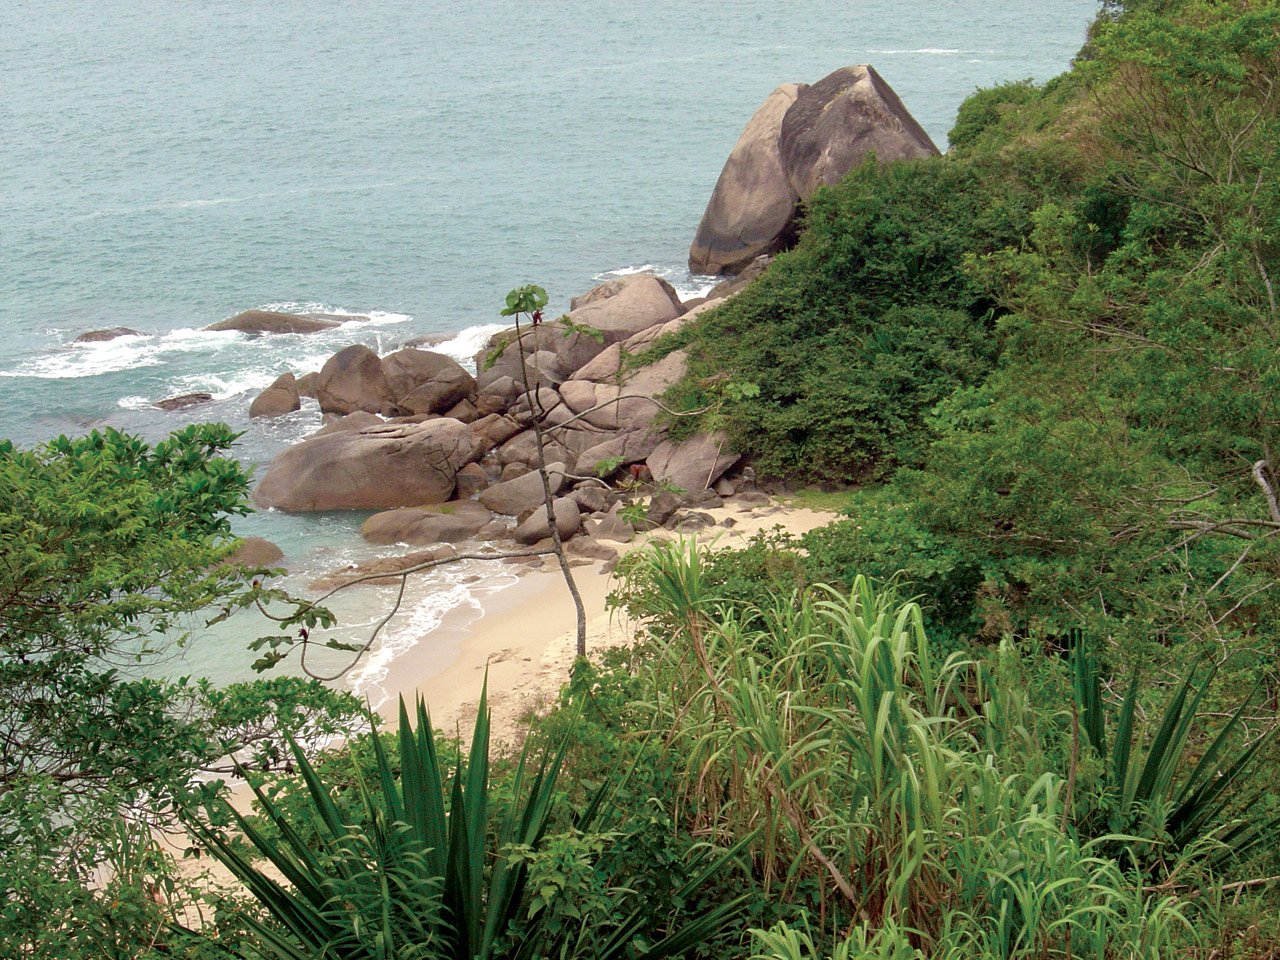 an area where the sand has a lot of rocks, grass and vegetation